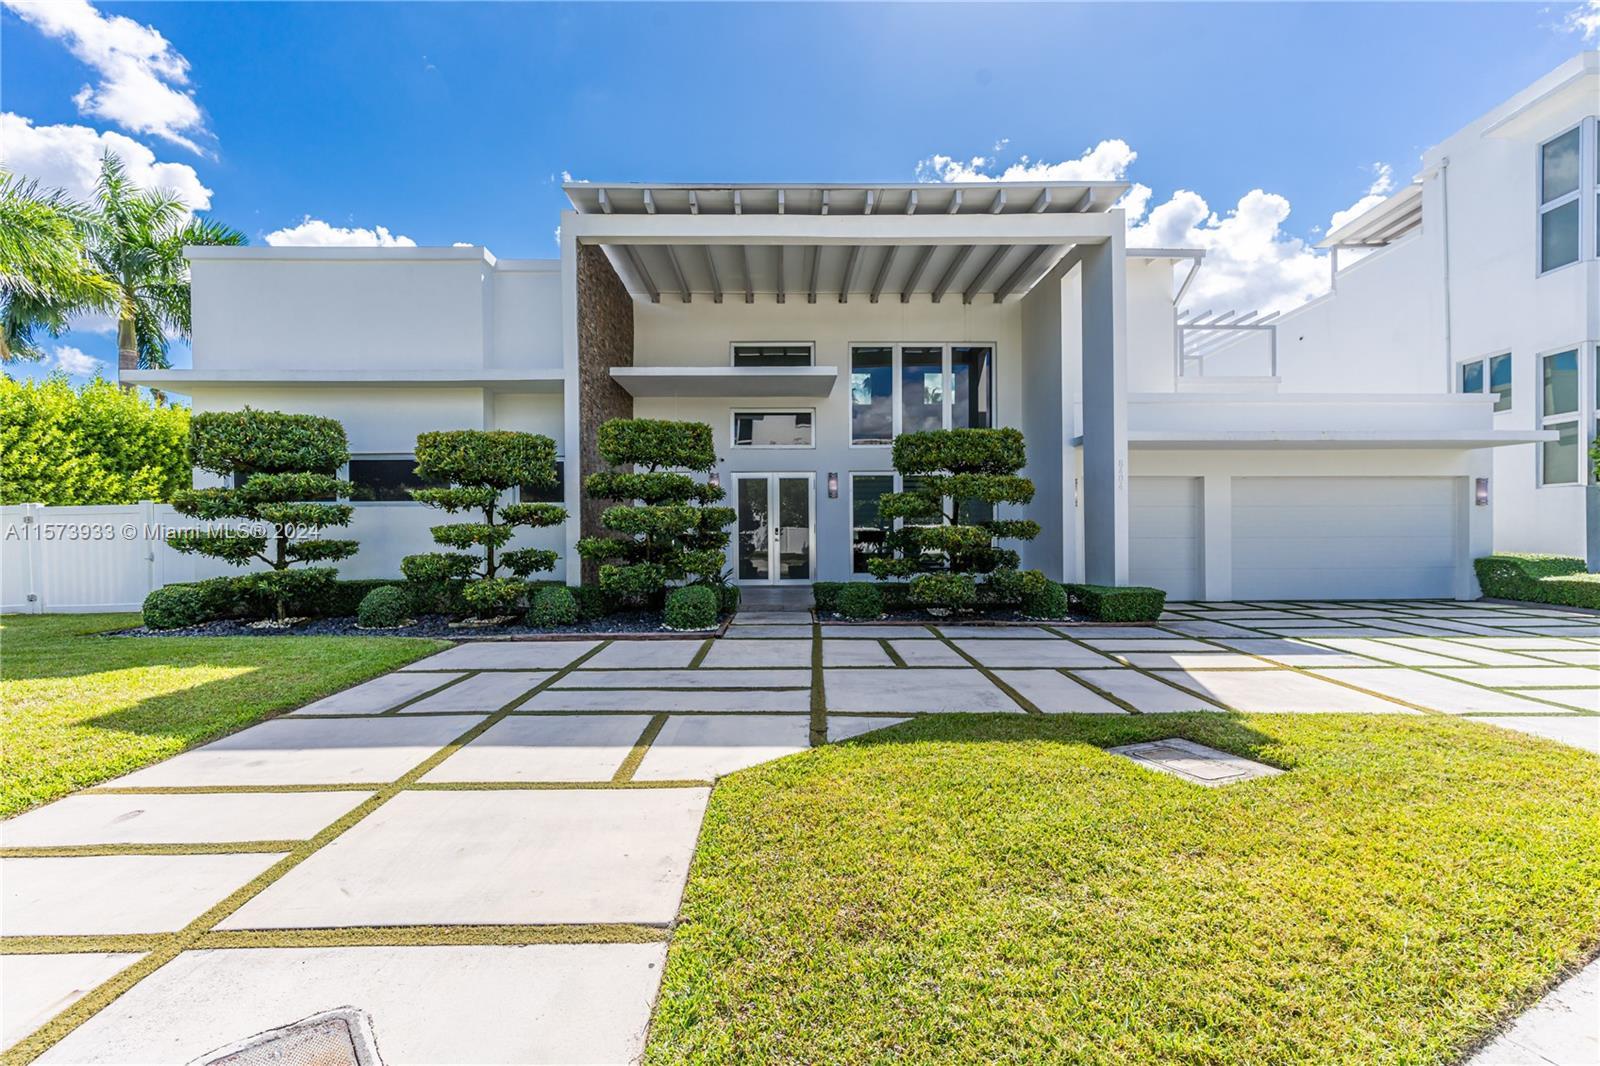 Spectacular home in the best area of Doral, the Oasis Park Square community, living area 3,838 squar